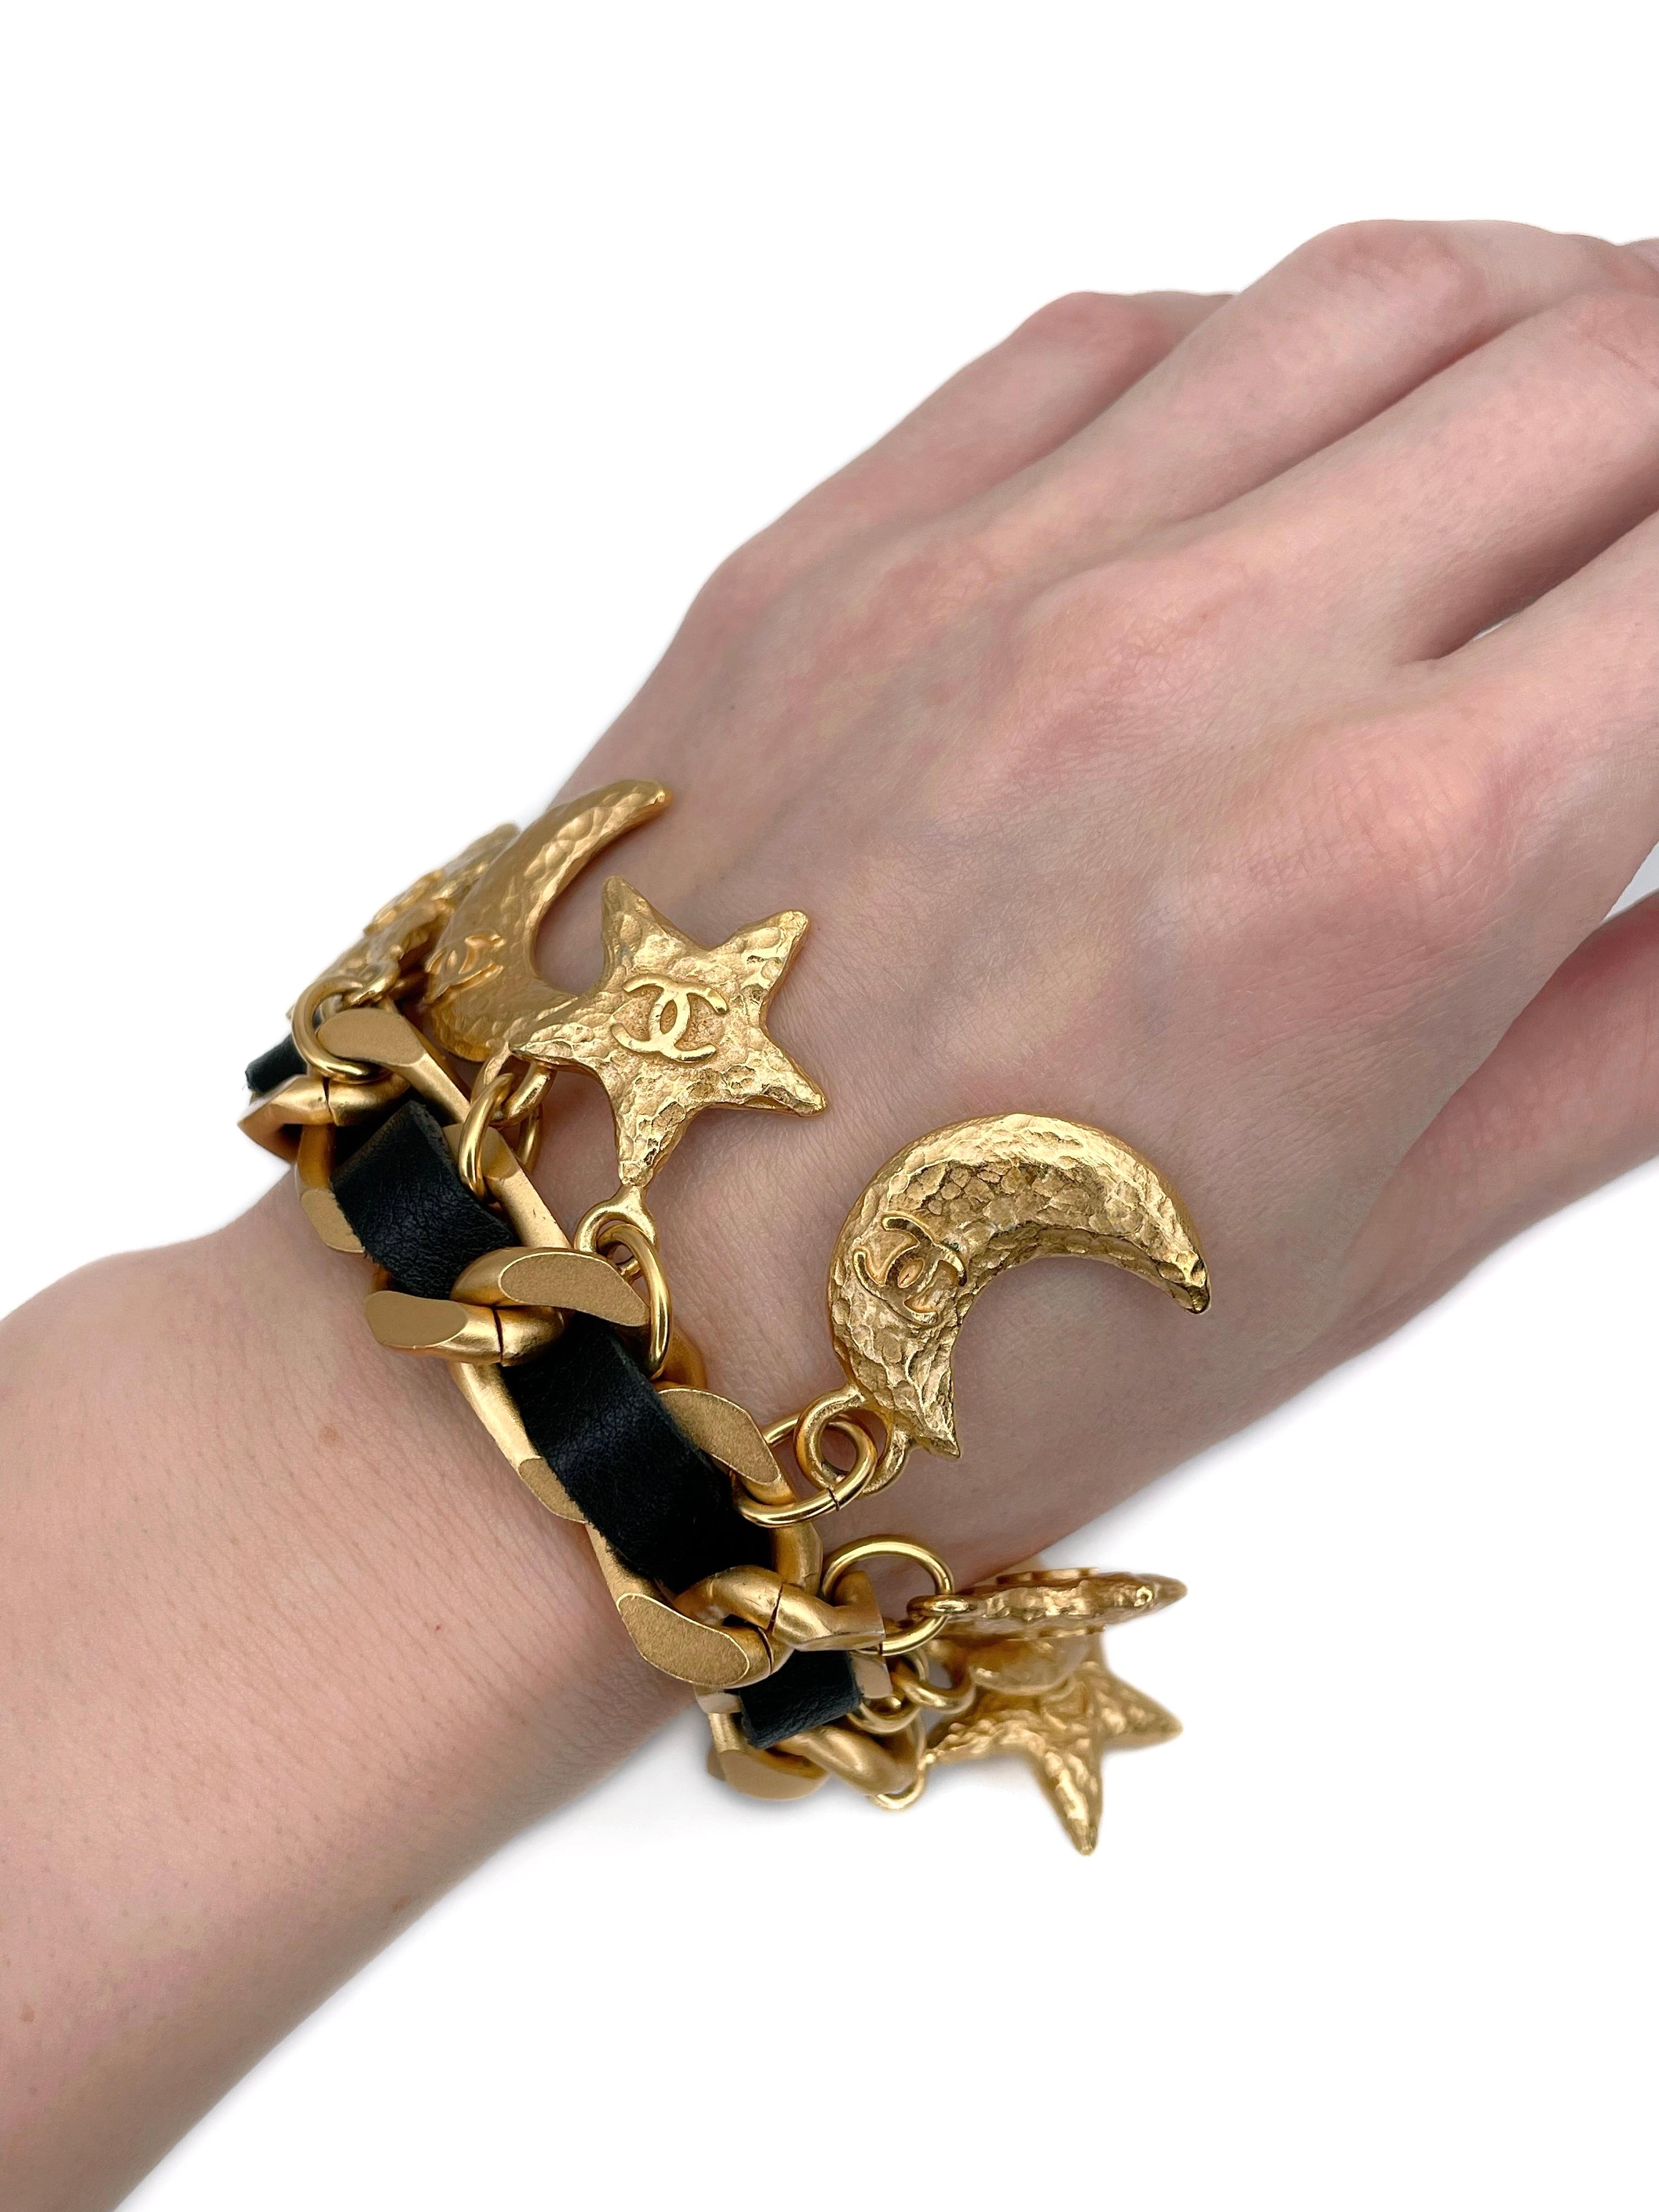 This is a vintage moon and star CC logo charm bracelet. The piece is designed by Chanel in 1990s. 

It is crafted in base metal and is gold plated. The bracelet features black leather. 

Signed: “© Chanel ® - 95A - Made in France” (see photo